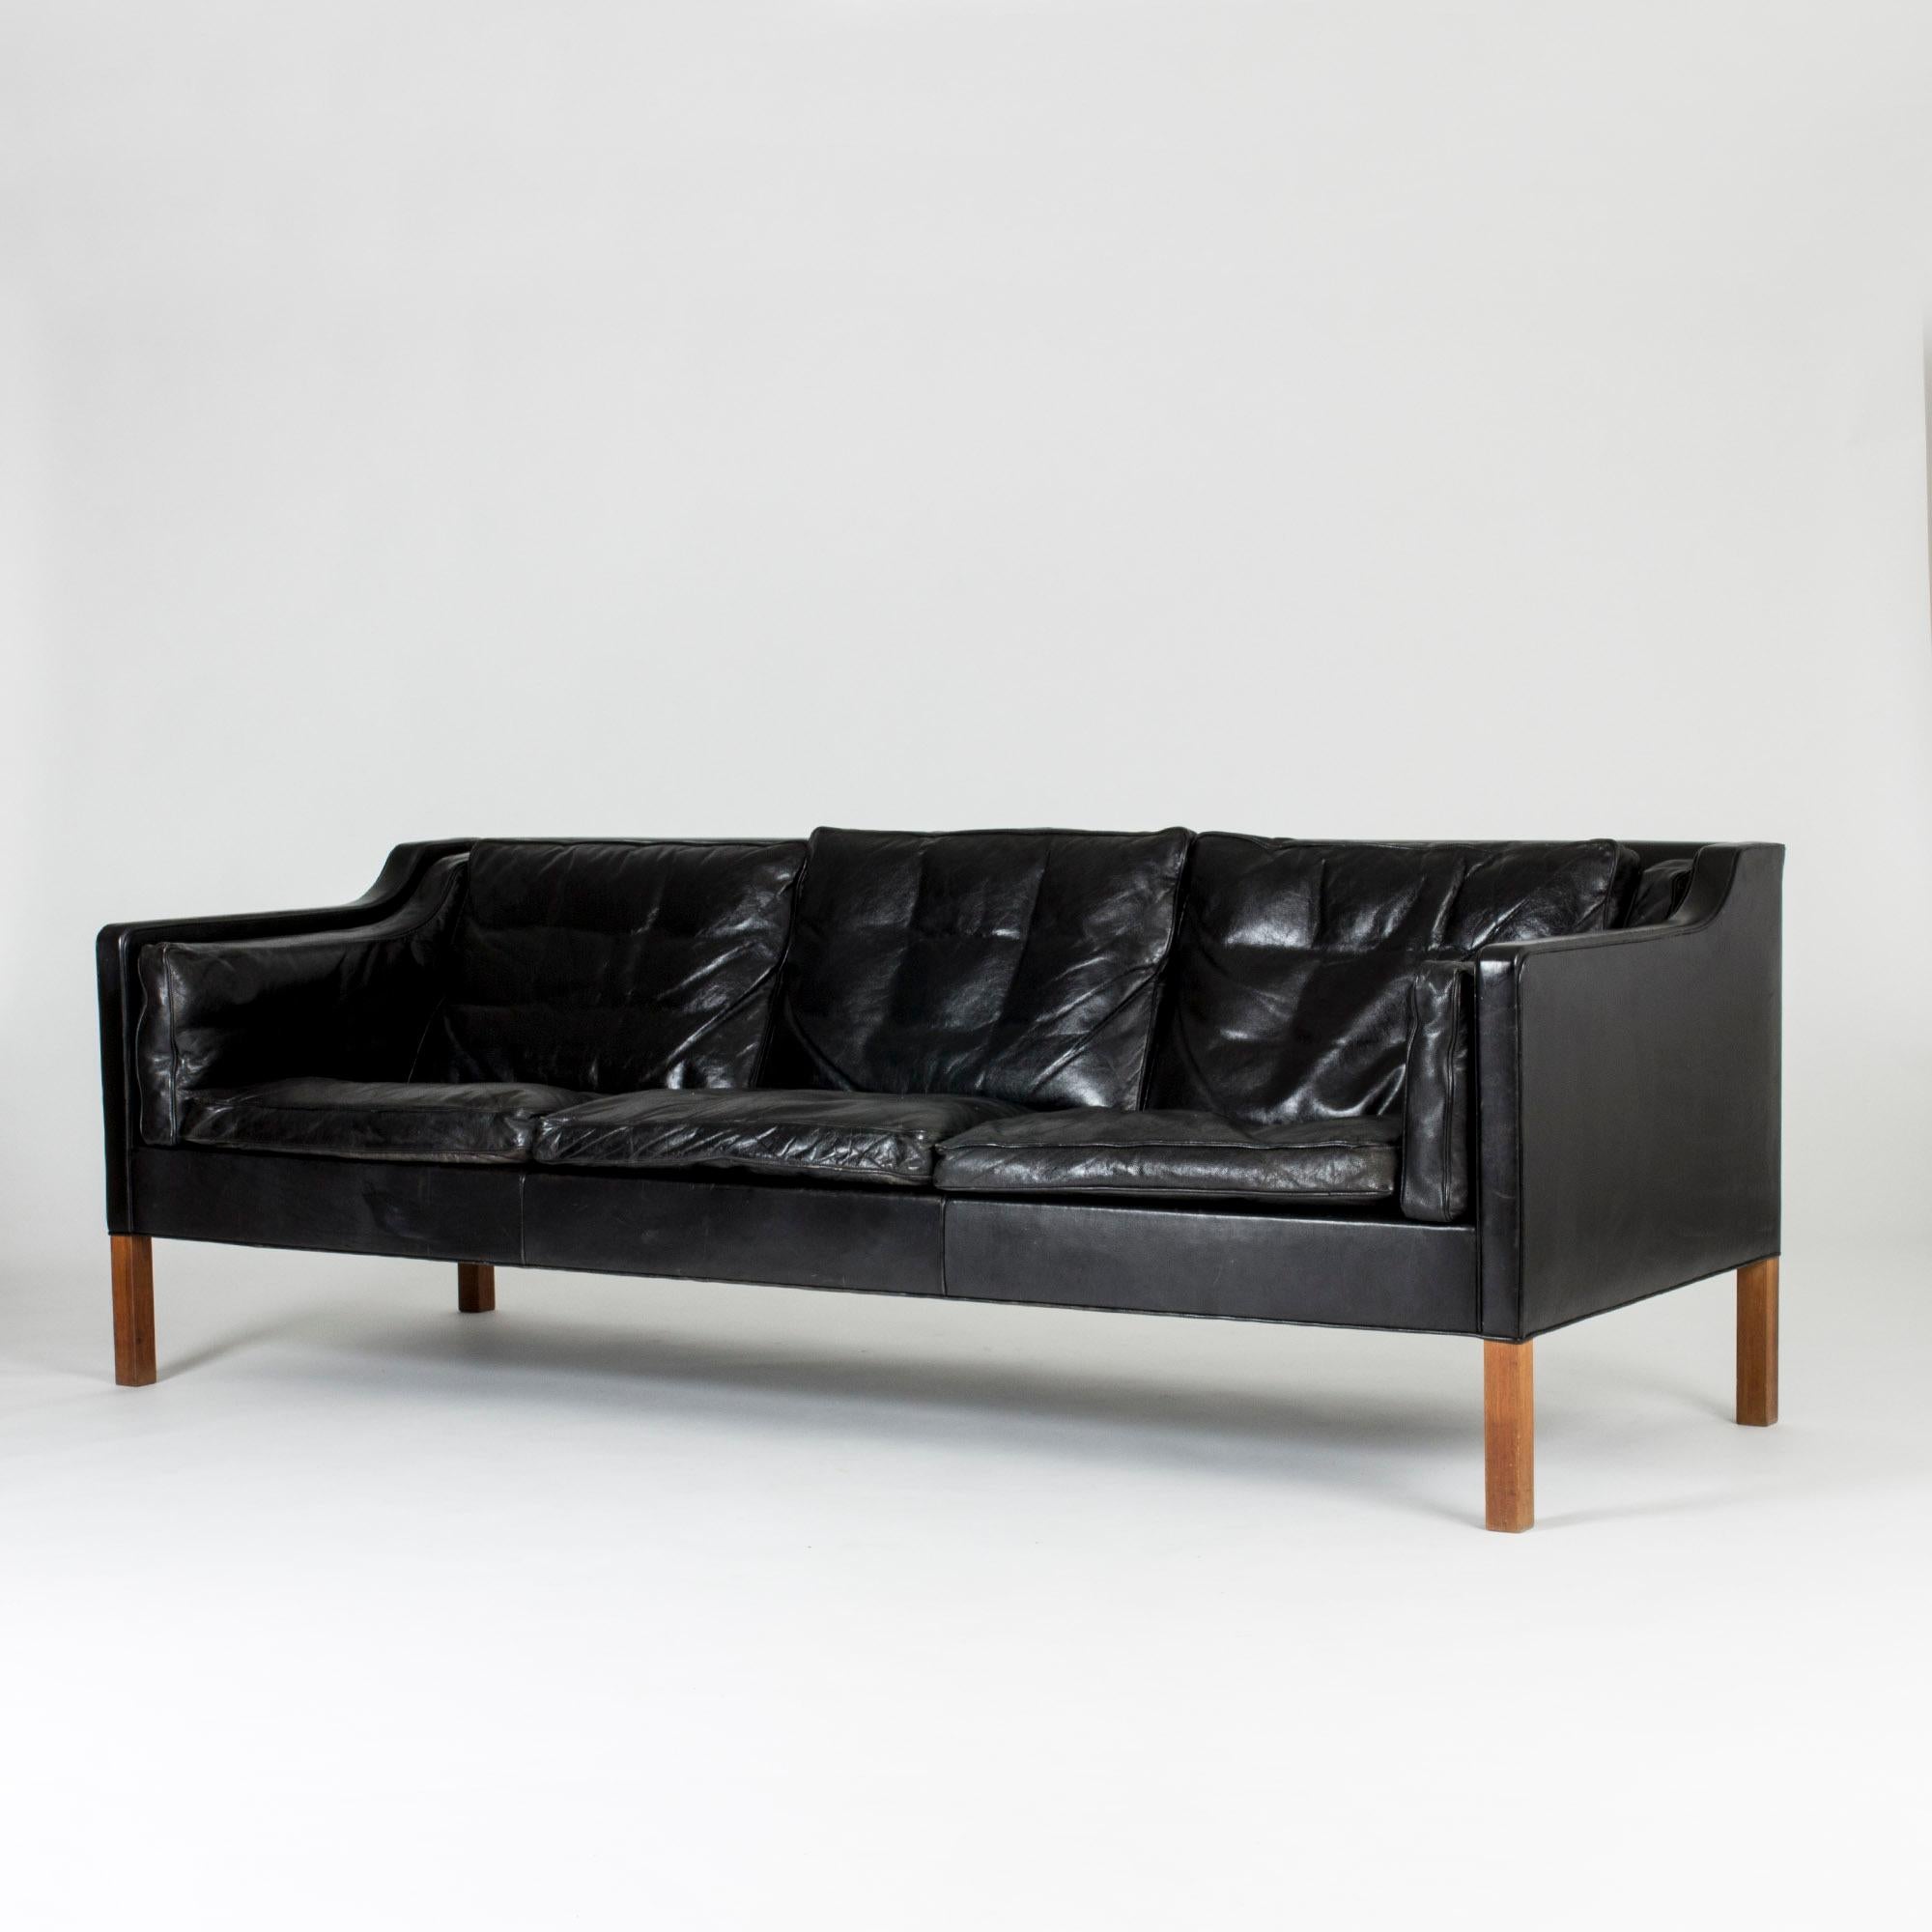 Elegant black leather sofa by Børge Mogensen, model 2213. Nicely aged leather and great comfort.